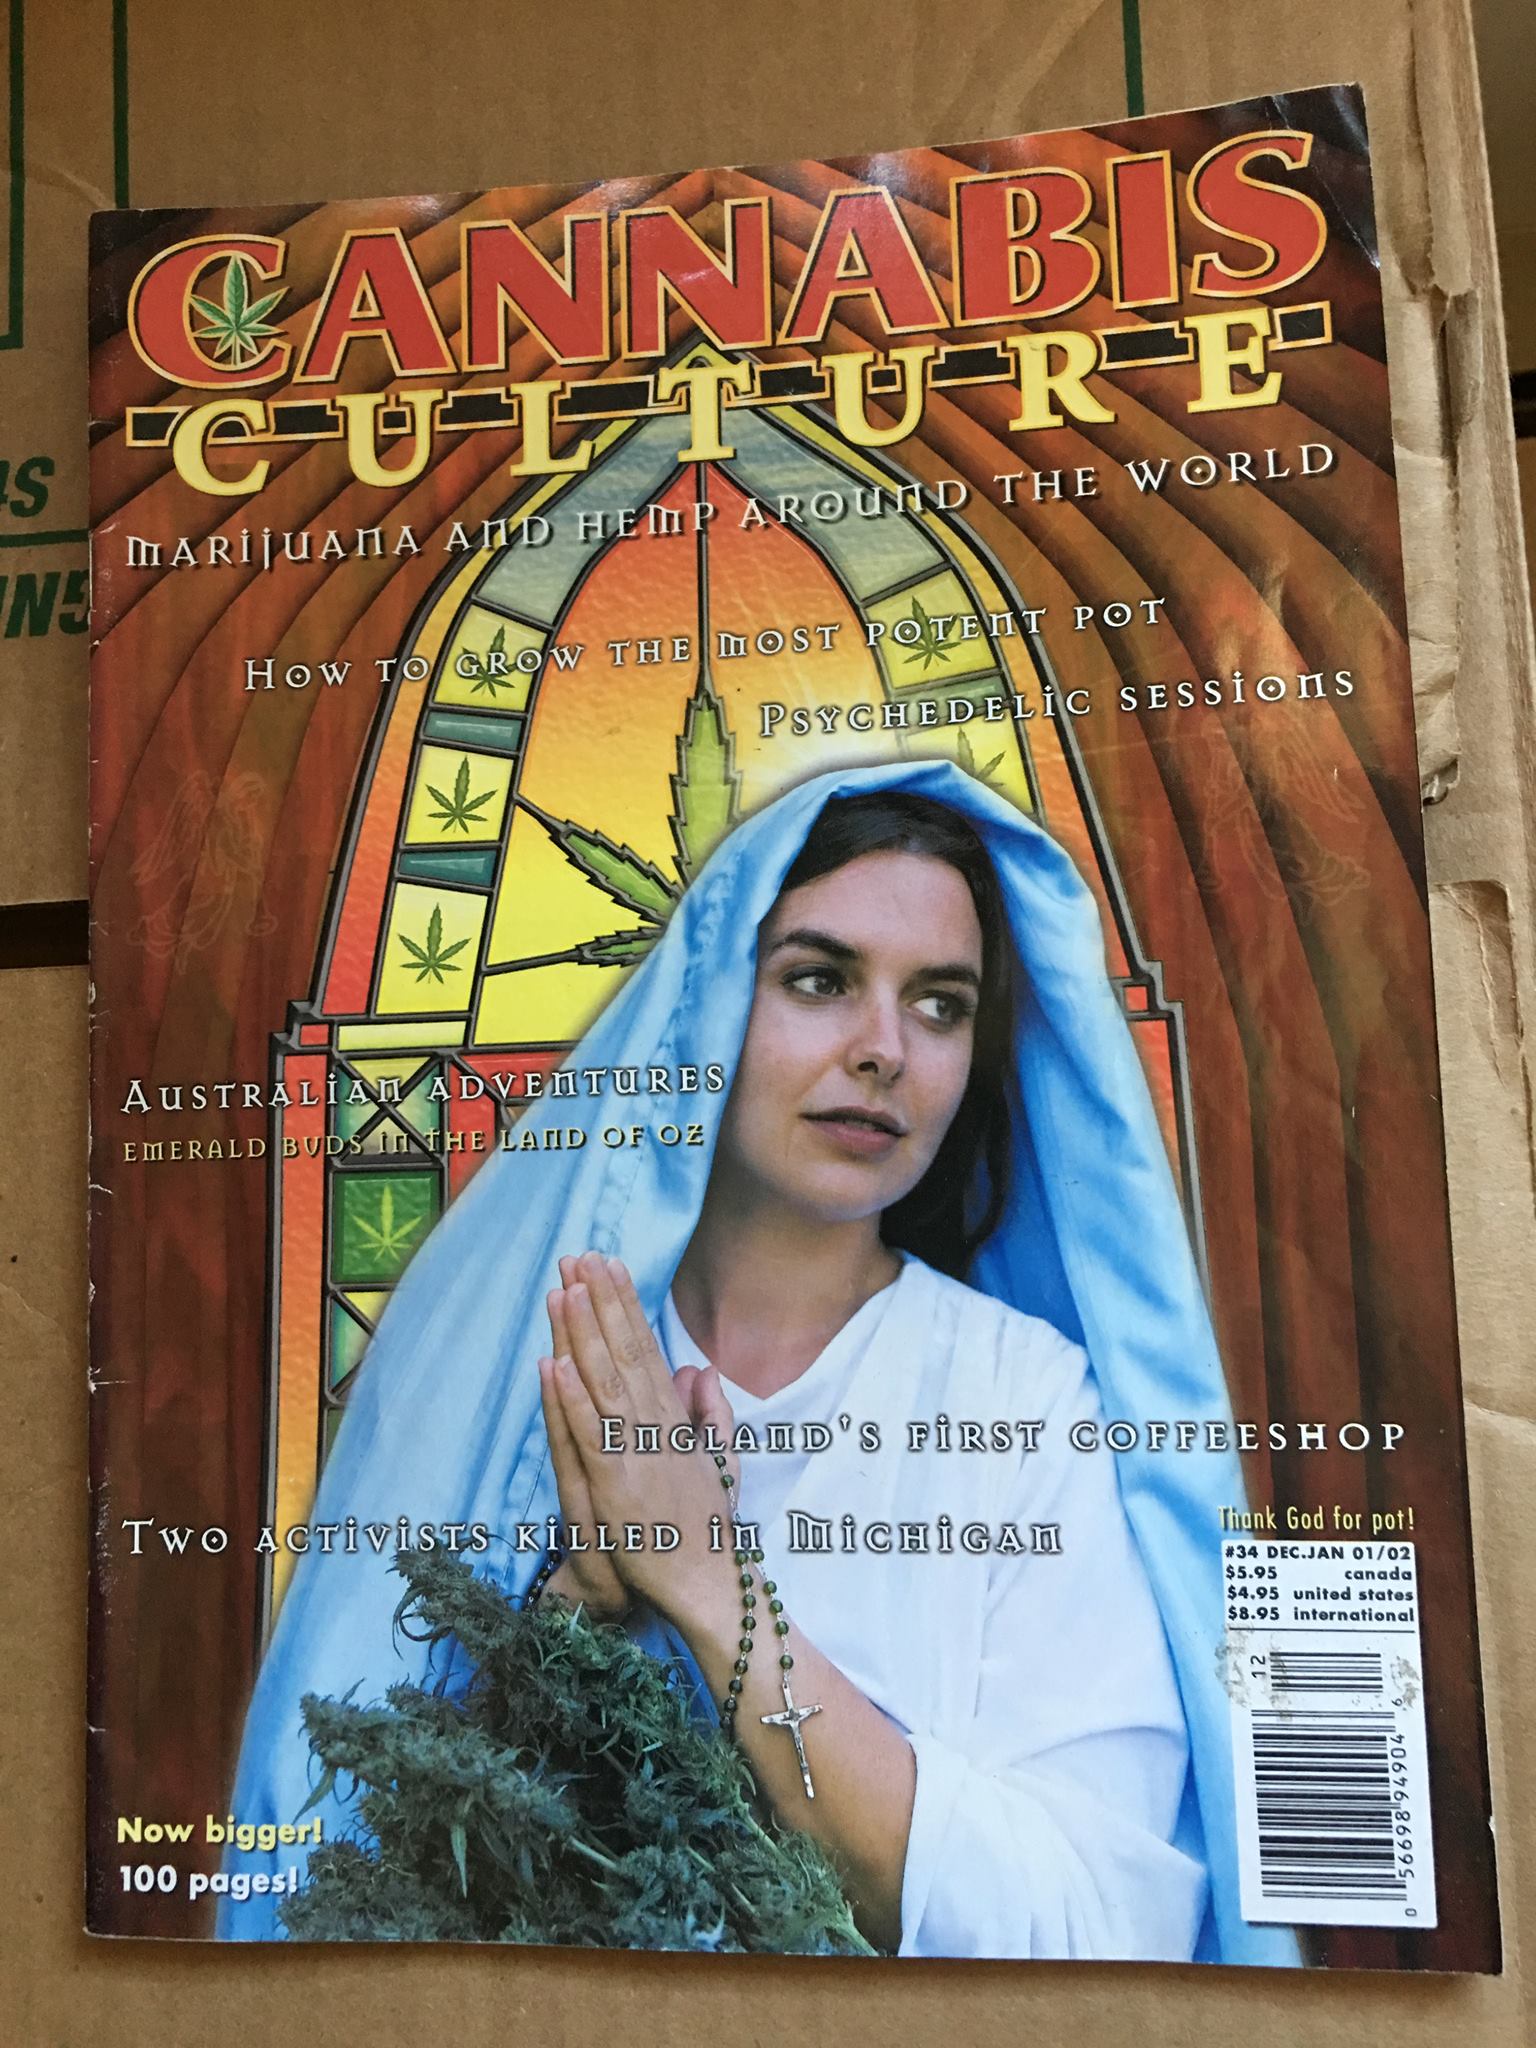 Hilary Black on the cover of Cannabis Culture Magazine, January 2002.